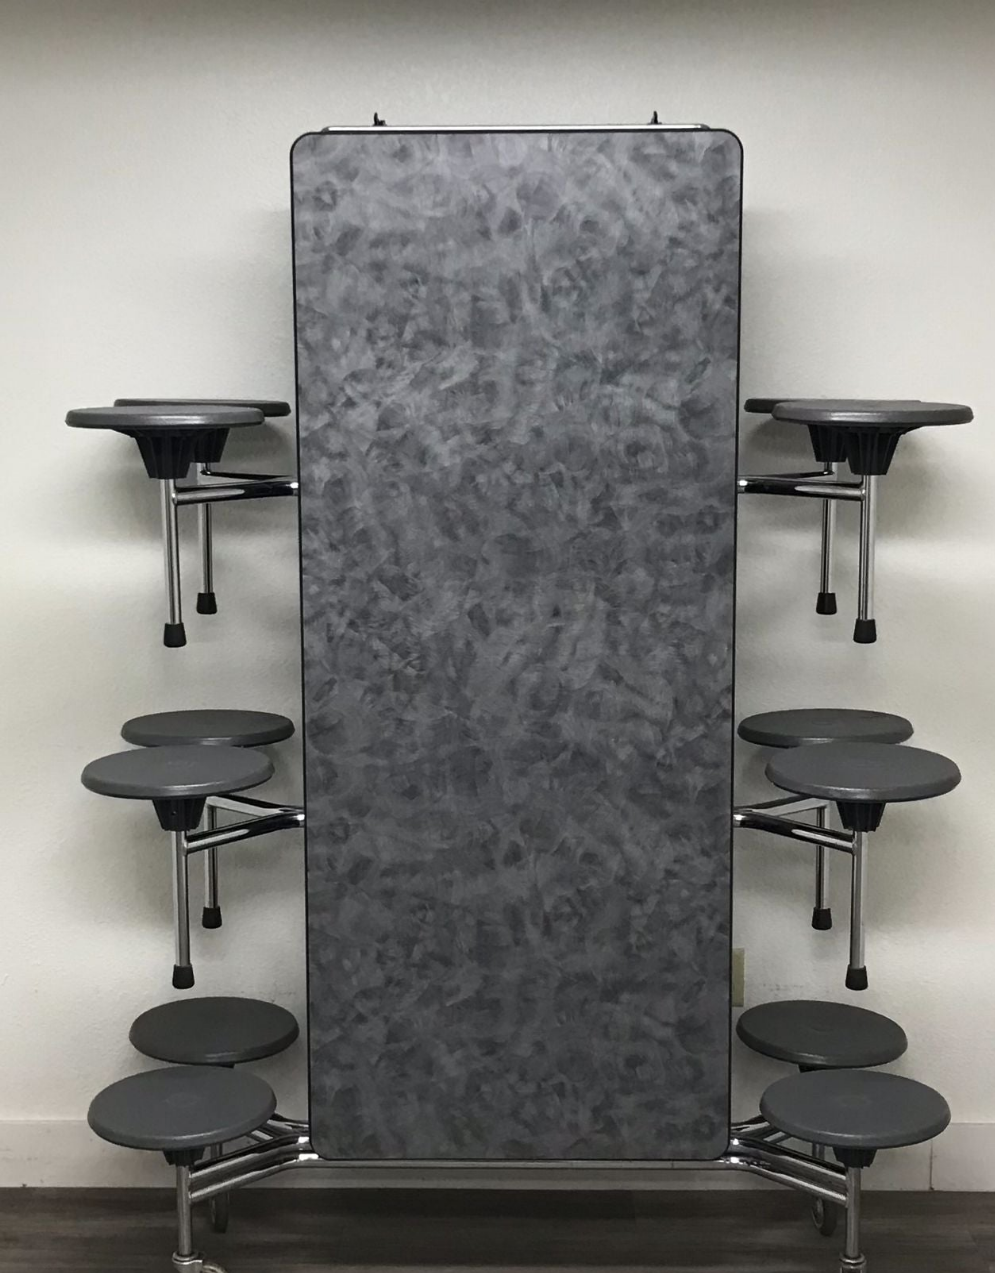 12ft Cafeteria Lunch Table w/ 12 Stool Seat, Gray Brush Top, Gray Seat, Adult Size (RF)